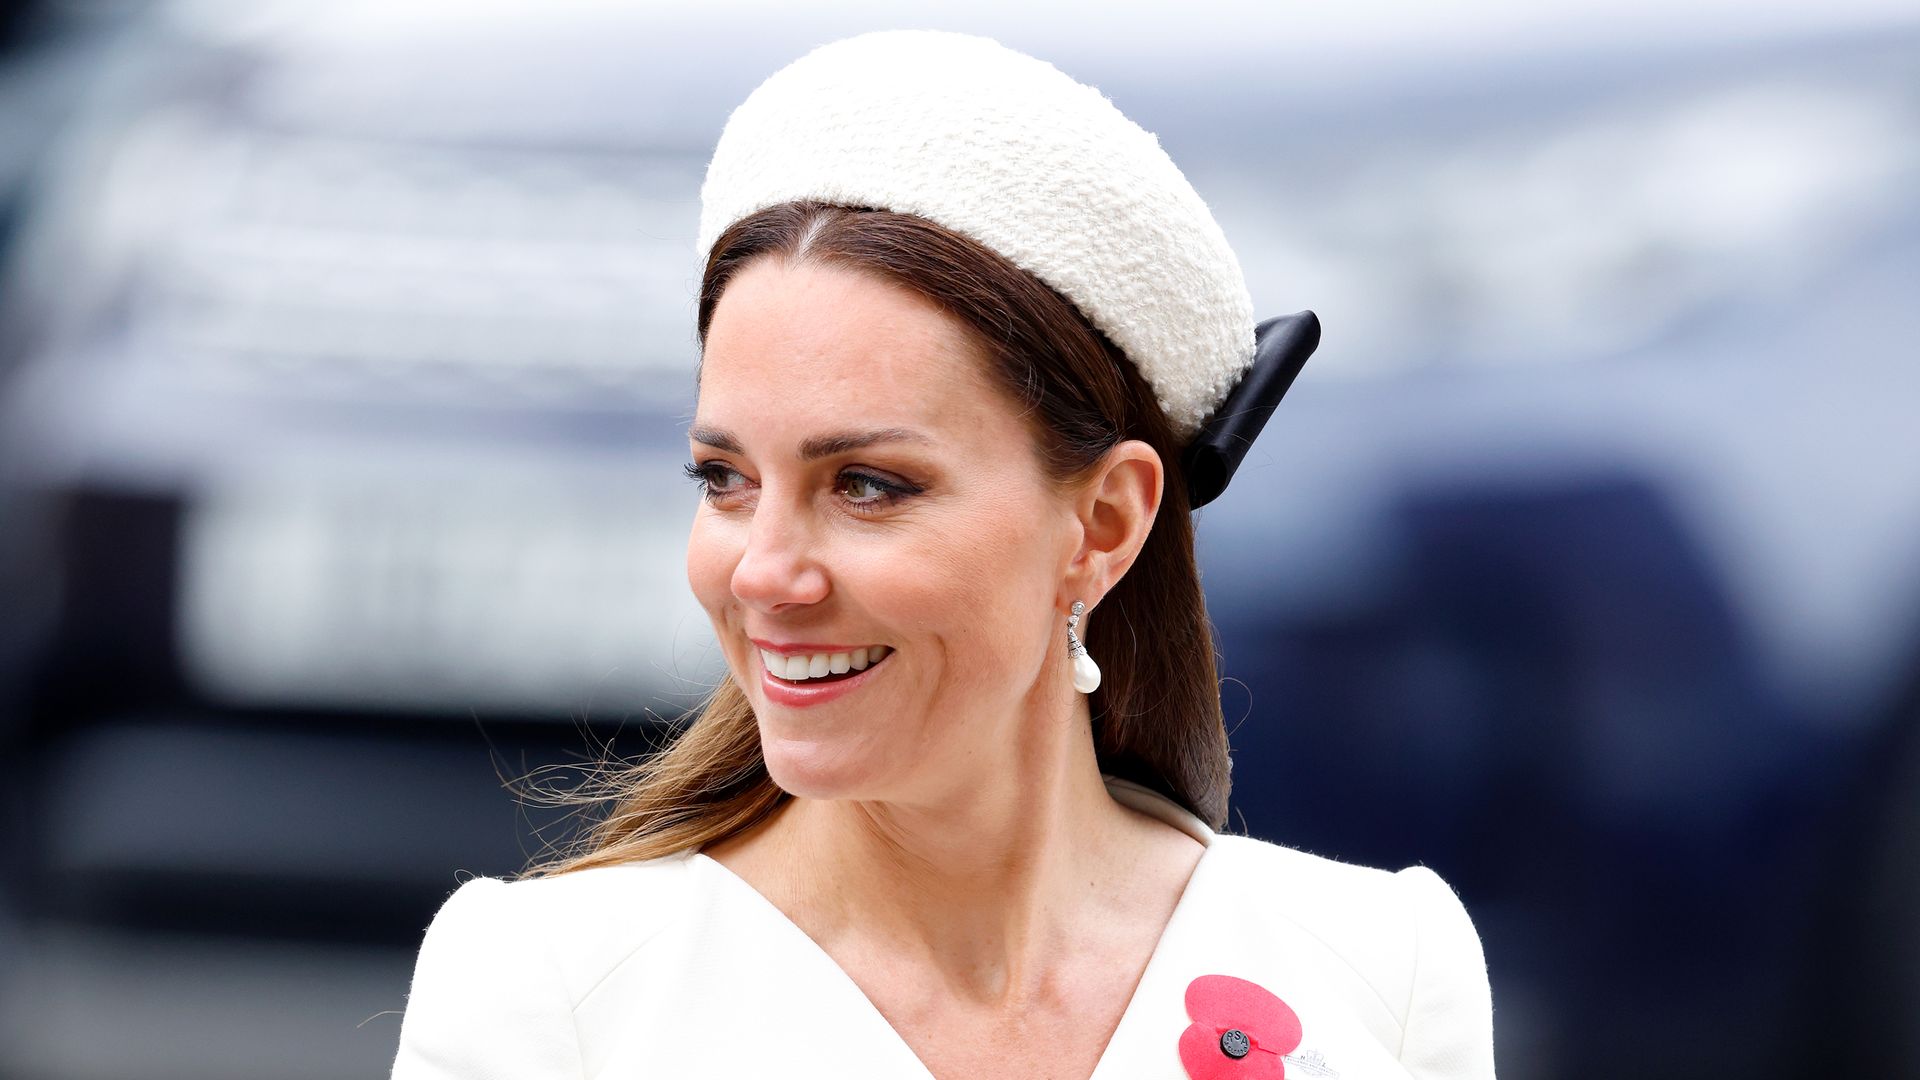 LONDON, UNITED KINGDOM - APRIL 25: (EMBARGOED FOR PUBLICATION IN UK NEWSPAPERS UNTIL 24 HOURS AFTER CREATE DATE AND TIME) Catherine, Duchess of Cambridge attends the Anzac Day Service of Commemoration and Thanksgiving at Westminster Abbey on April 25, 2022 in London, England. Anzac Day is the national day of remembrance in Australia and New Zealand marking the anniversary of the Anzac (Australian and New Zealand Army Corps) landings at Gallipoli in 1916 during the First World War. (Photo by Max Mumby/Indigo/Getty Images)